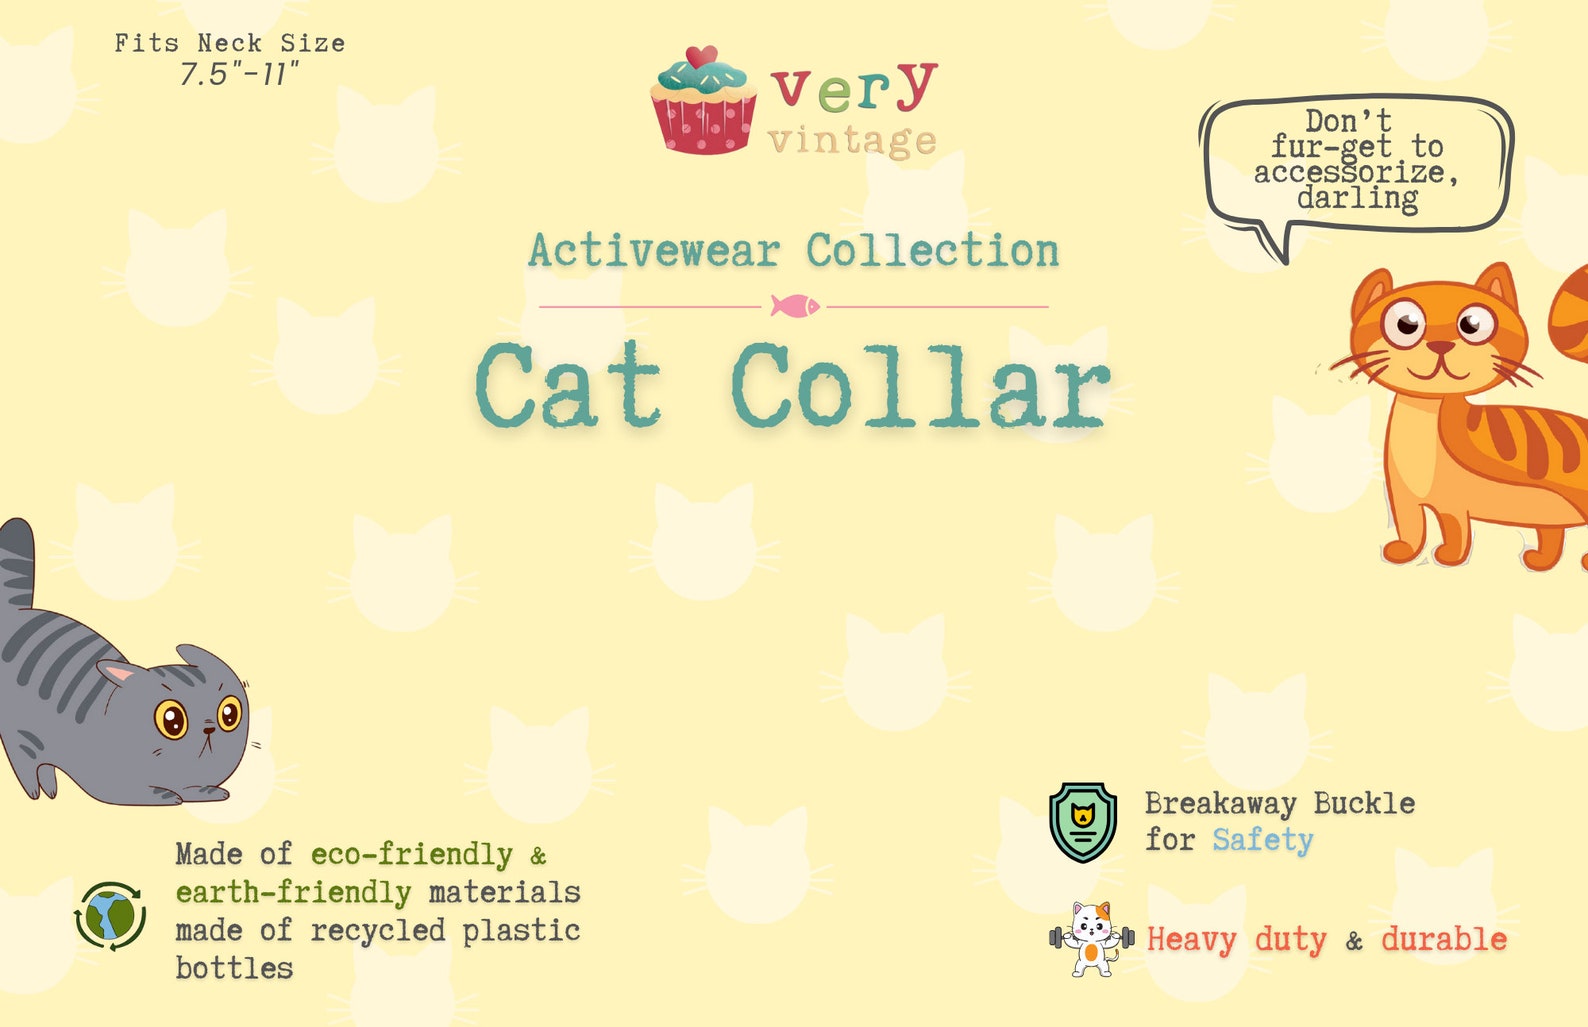 What's Unique About Our Activewear Cat Collars